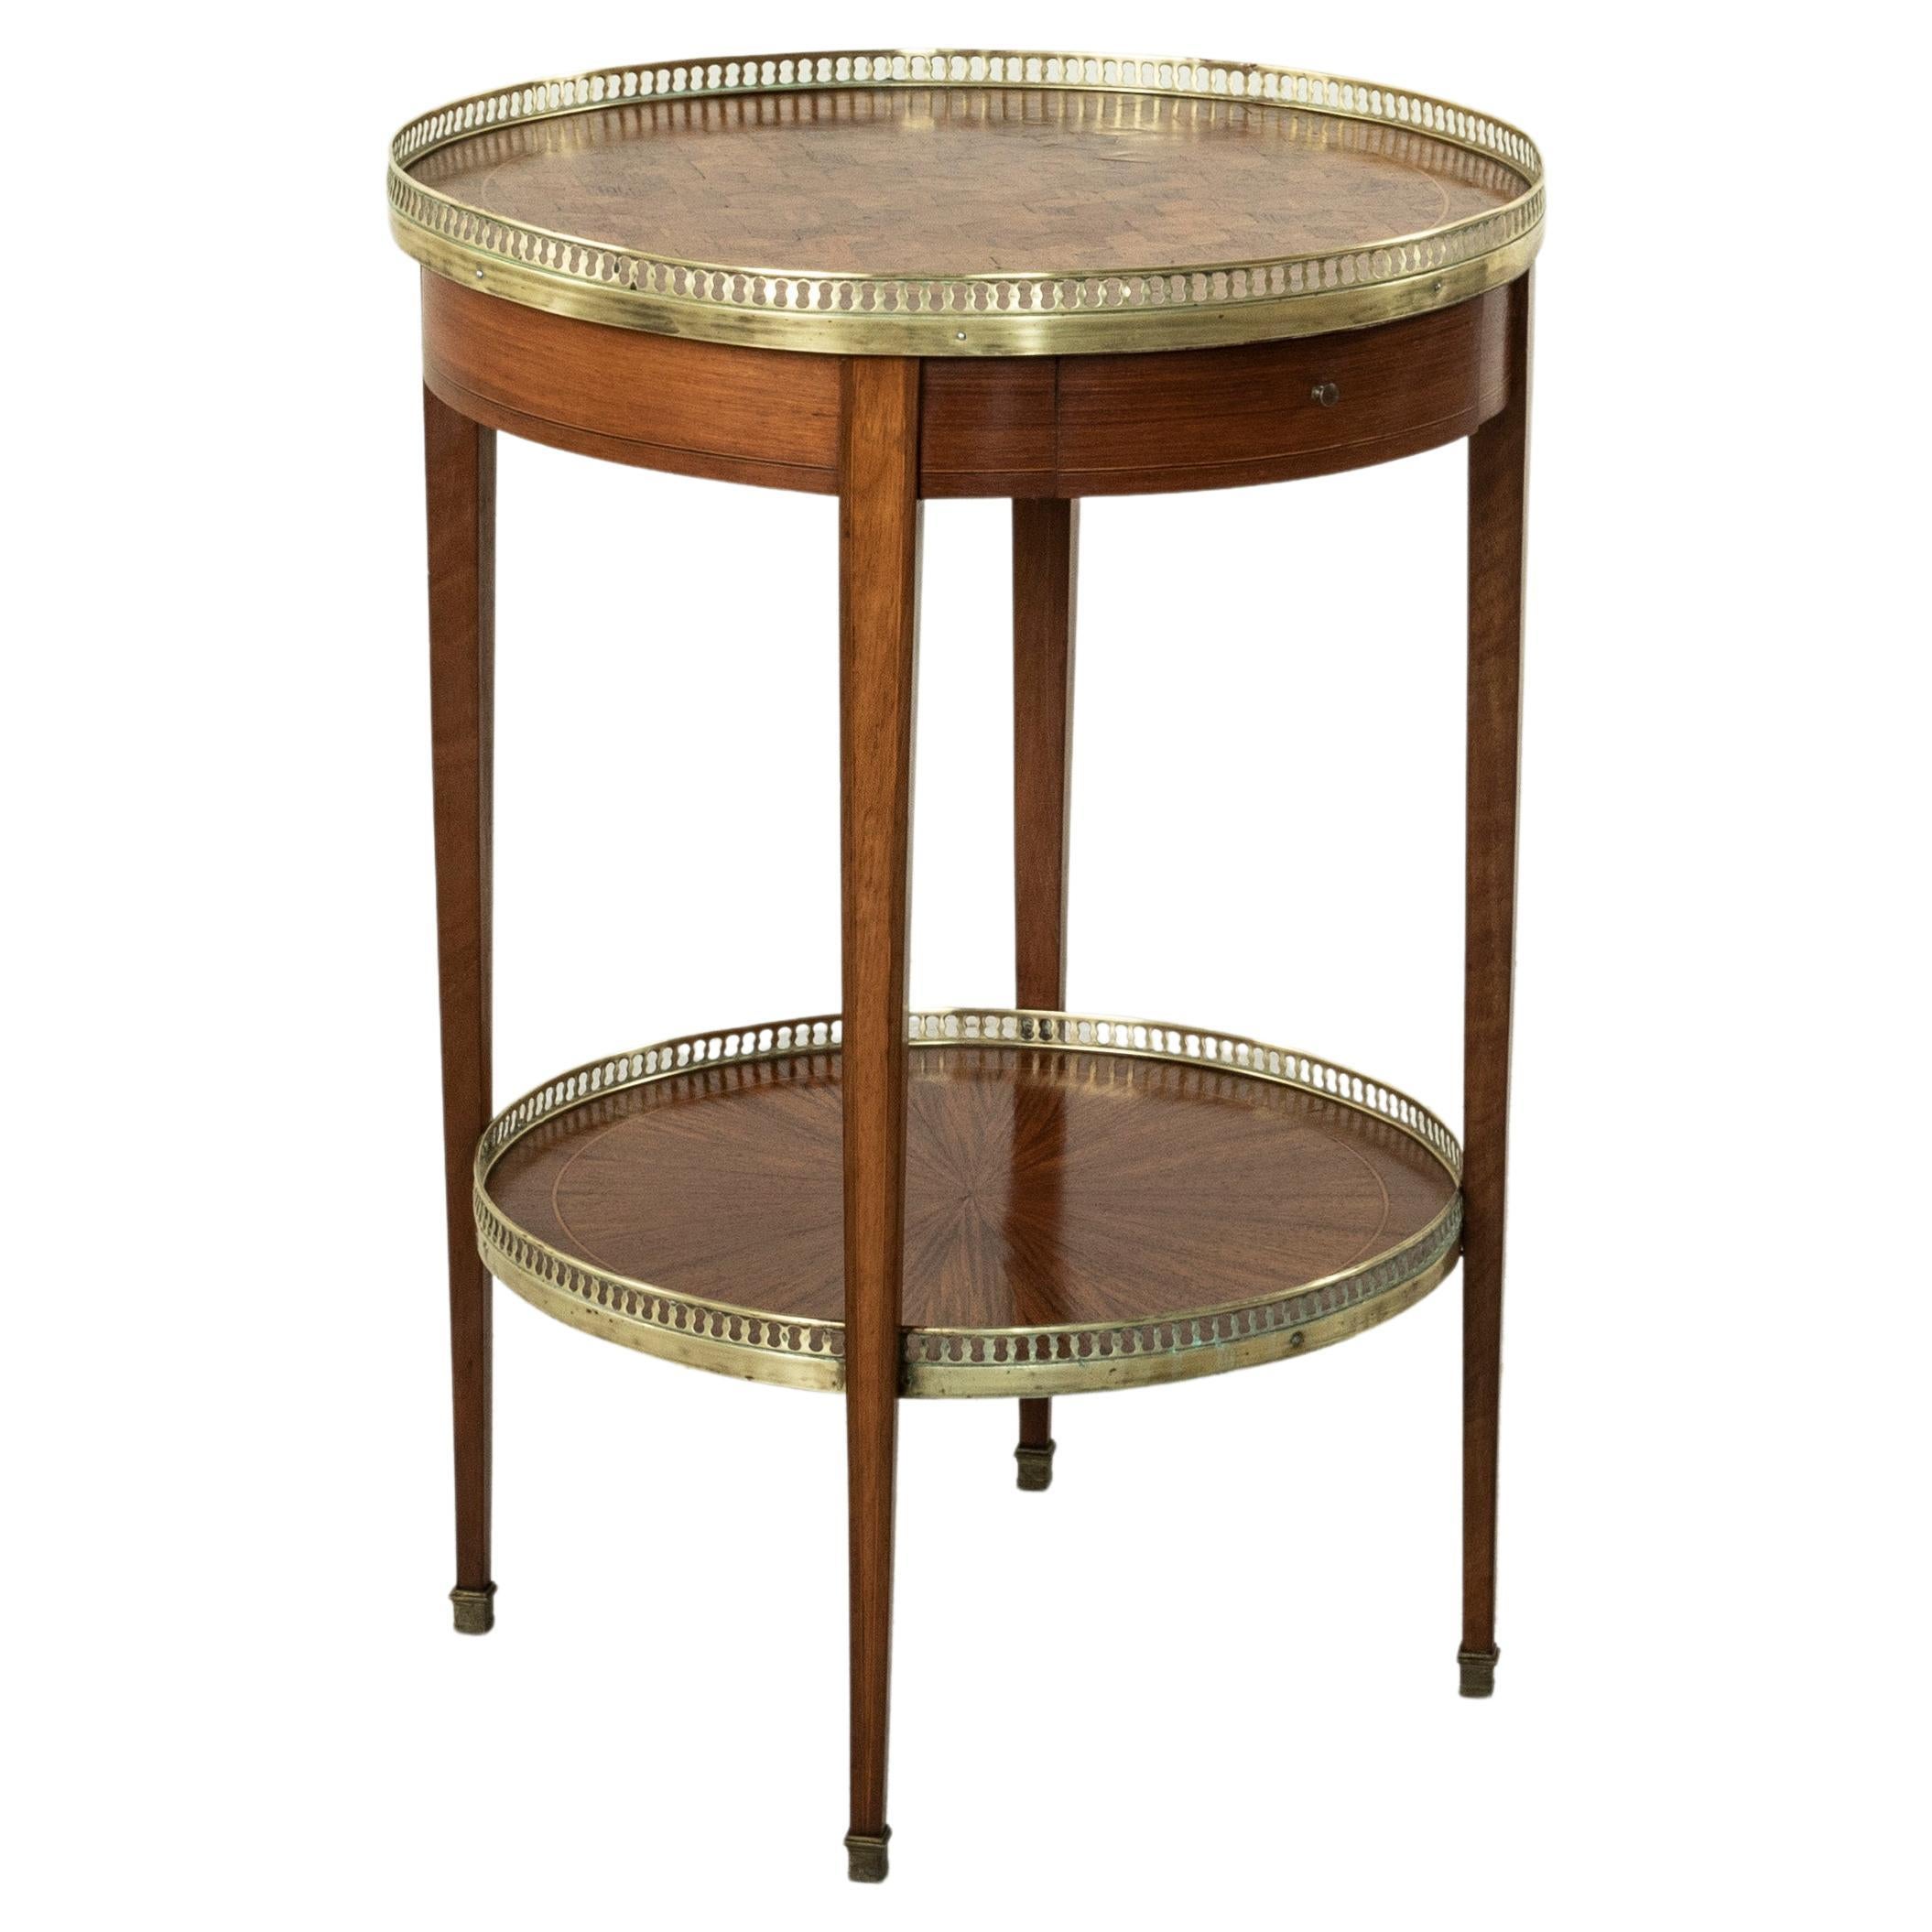 Late 19th Century French Louis XVI Style Rosewood Marquetry Side Table